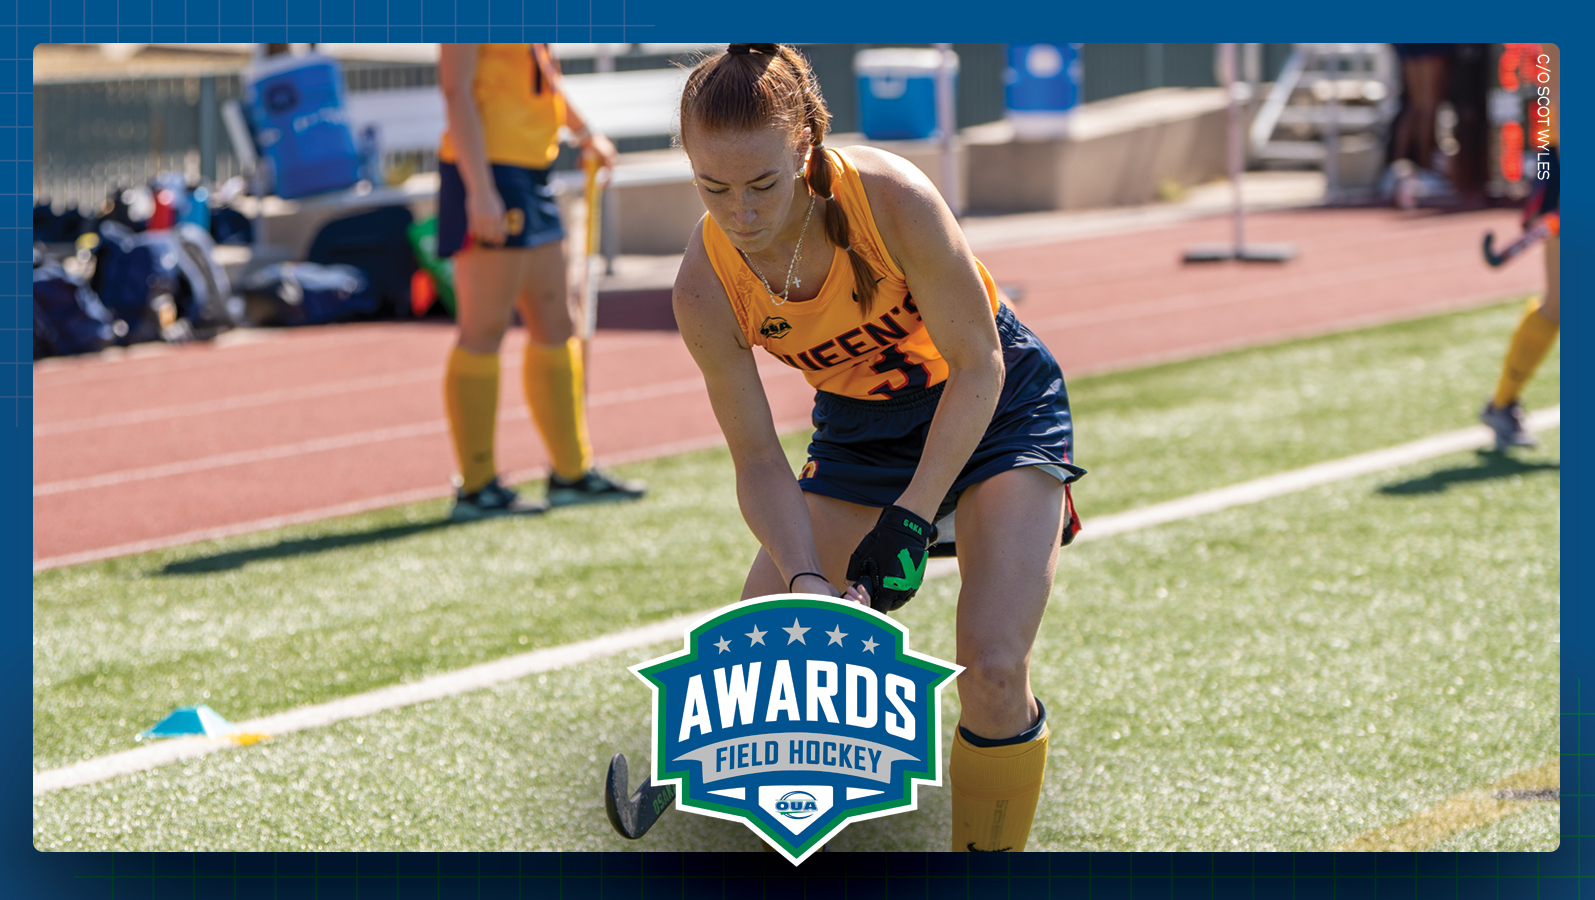 Graphic on predominantly blue background featuring action photo of Queen's field hockey player Nina Watson centered therein, and the OUA field hockey awards logo layered over top of it in the lower third